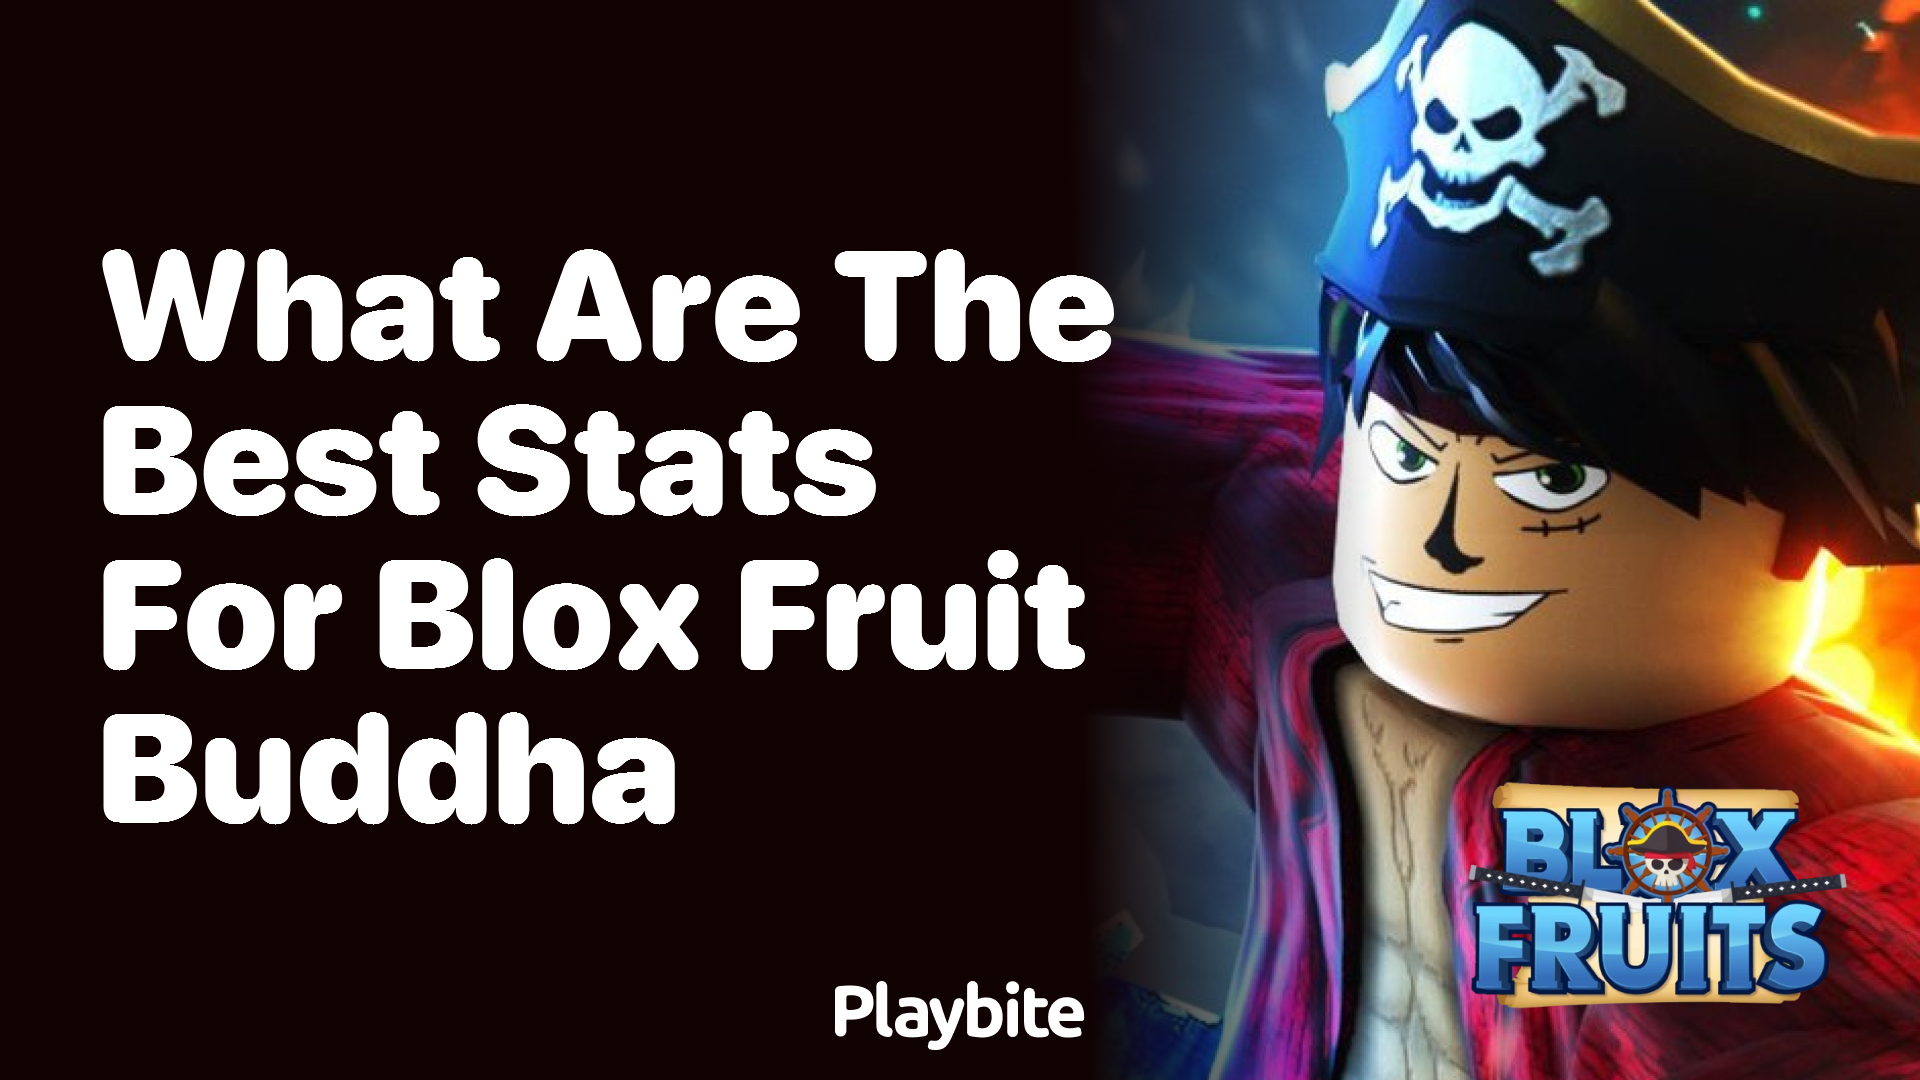 What Are the Best Stats for Blox Fruit Buddha?